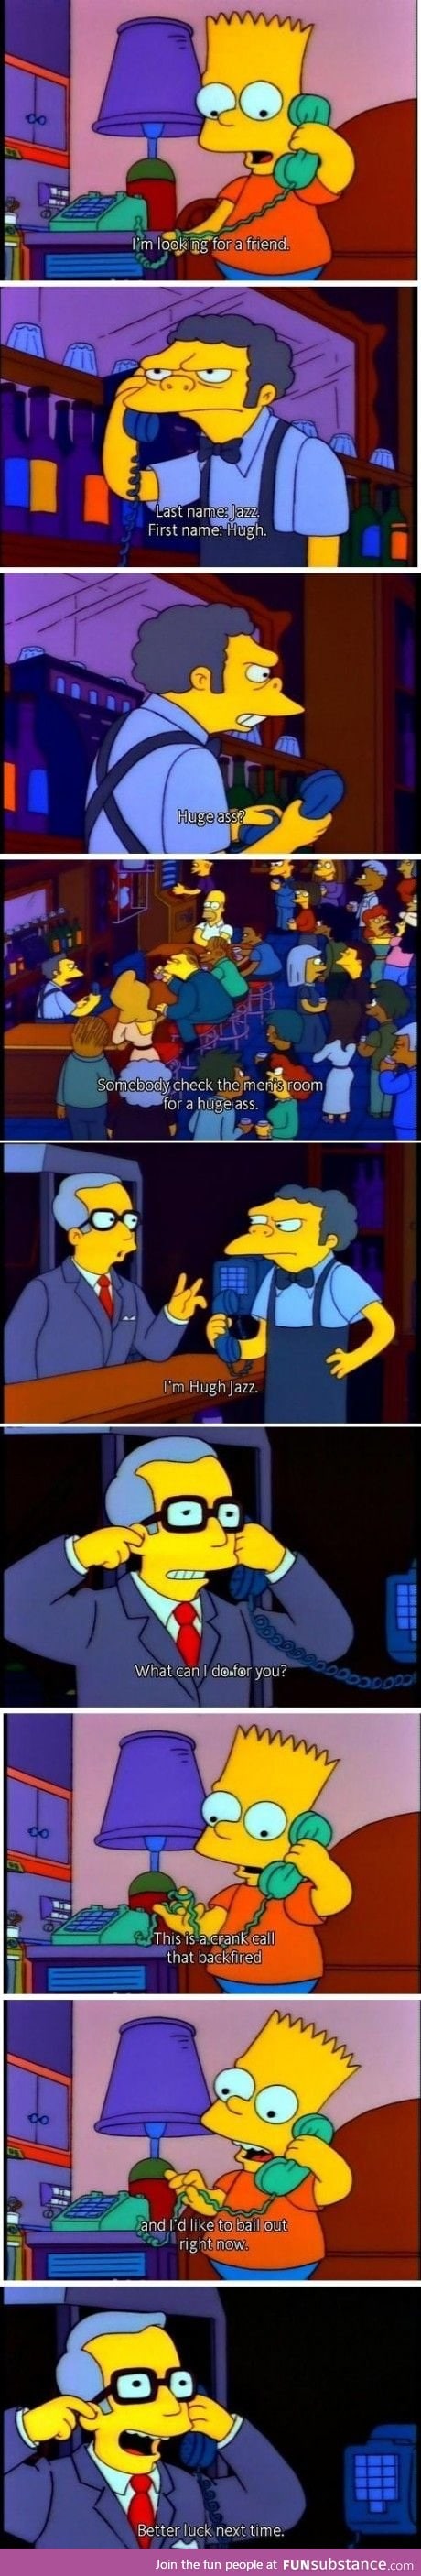 Oh the Simpsons